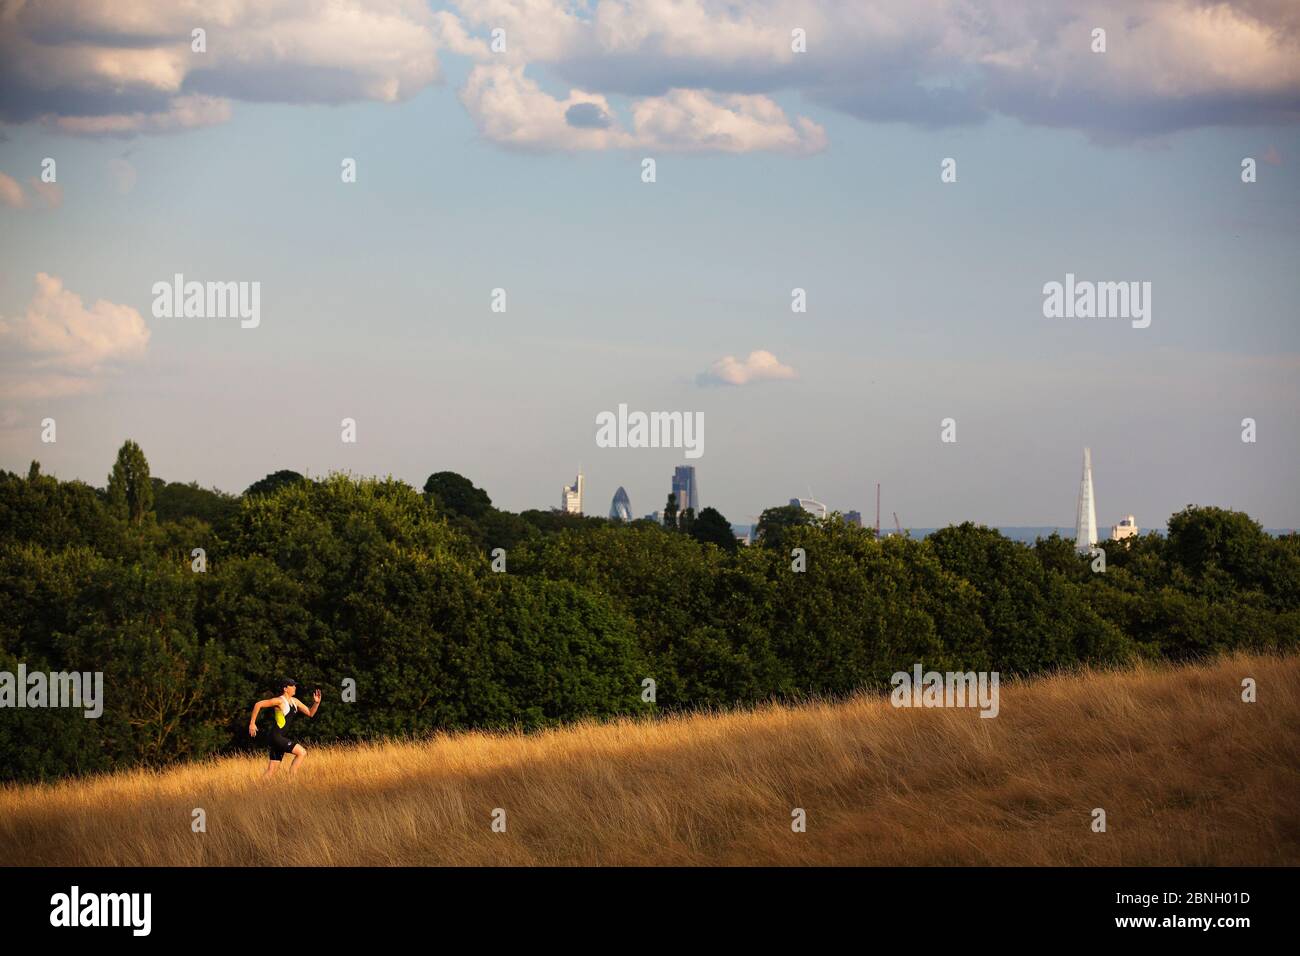 Runner sprinting up a hill in Cohen's Fields Hampstead Heath, London, England, UK. August 2014. Stock Photo